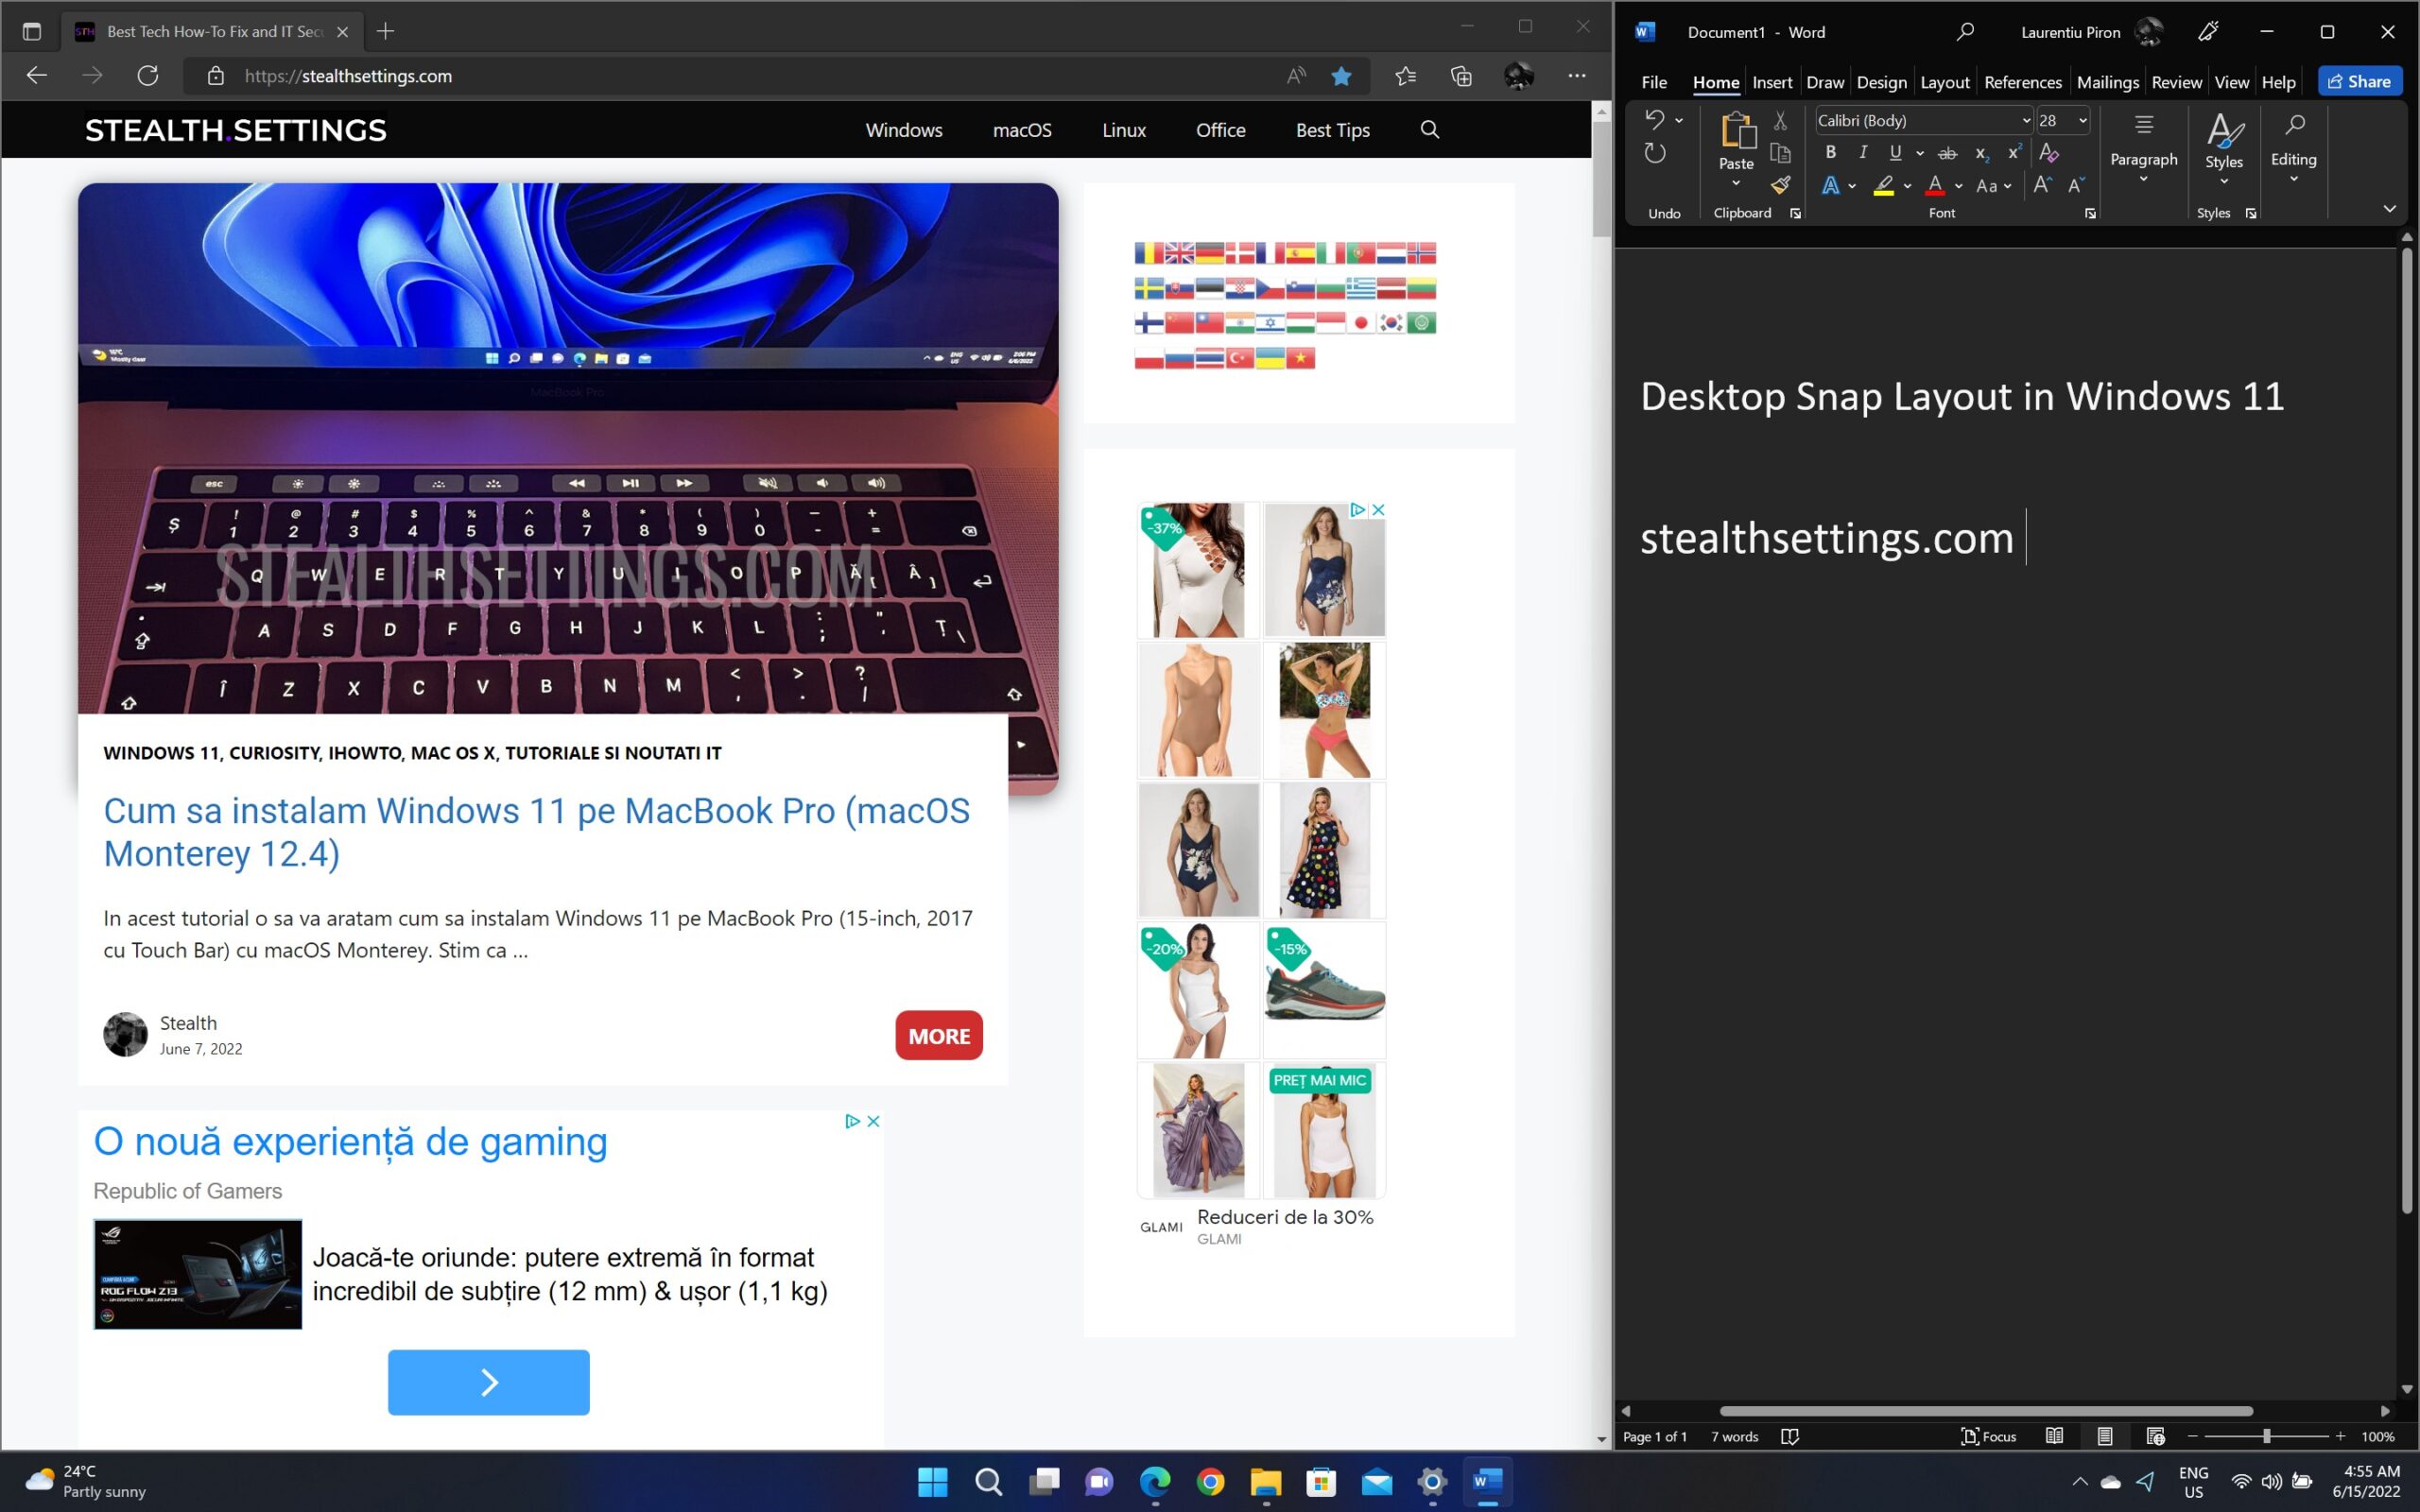 Snap Layout in Windows 11